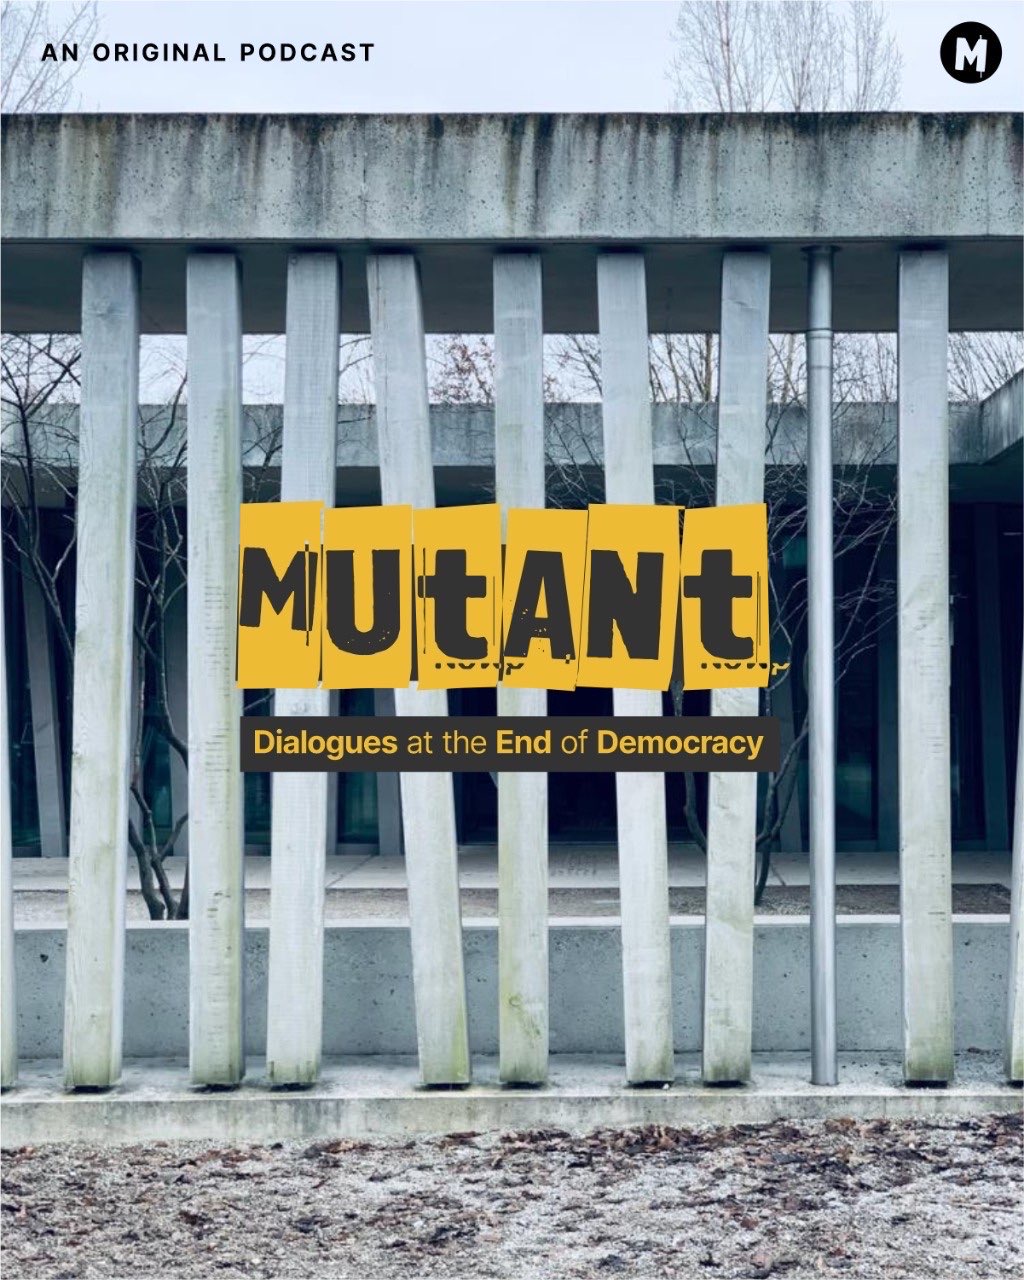 An Original Podcast.  Mutant: Dialogues at the End of Democracy